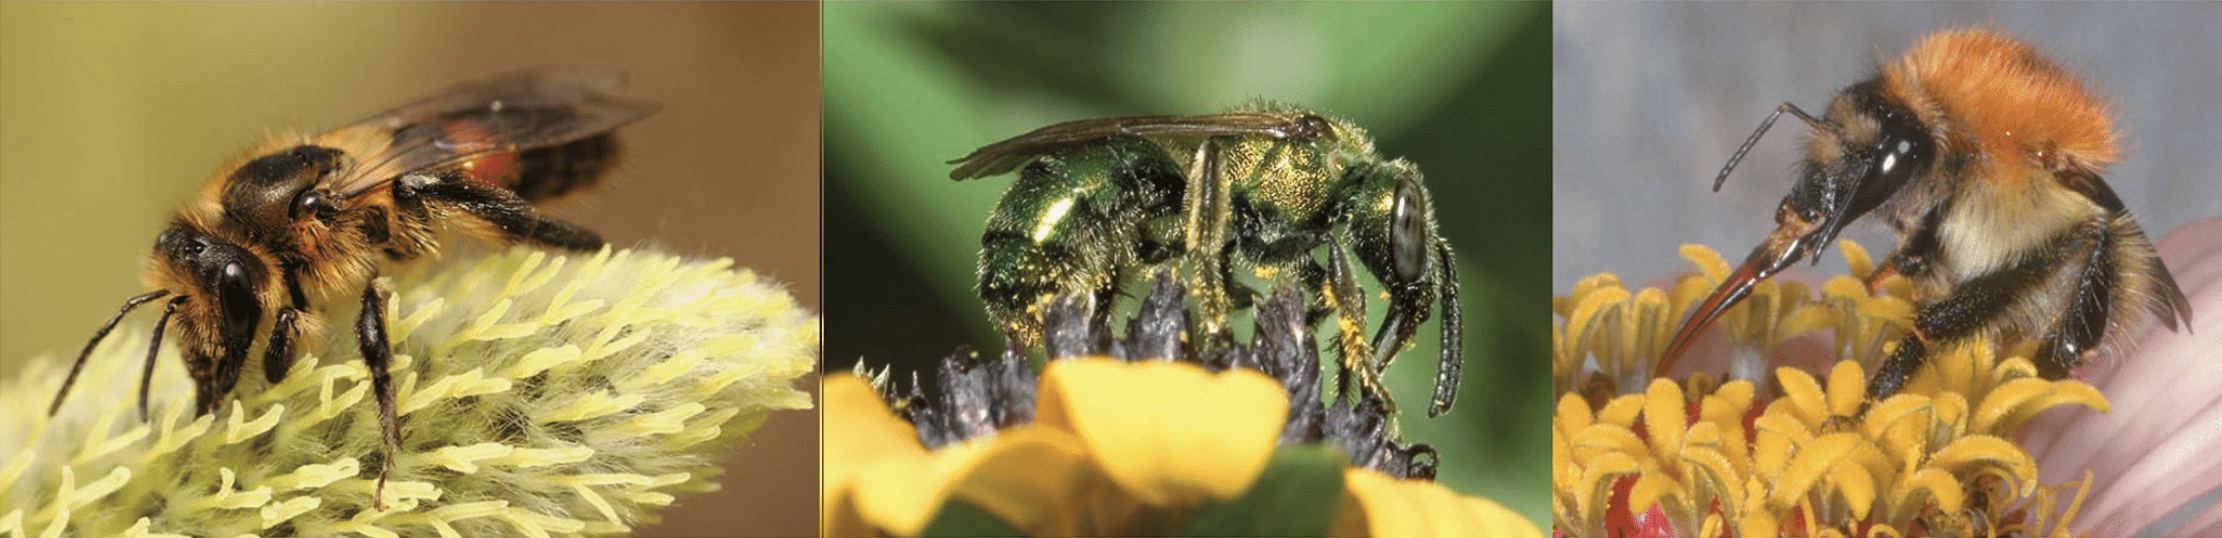 different types of bees on flowers